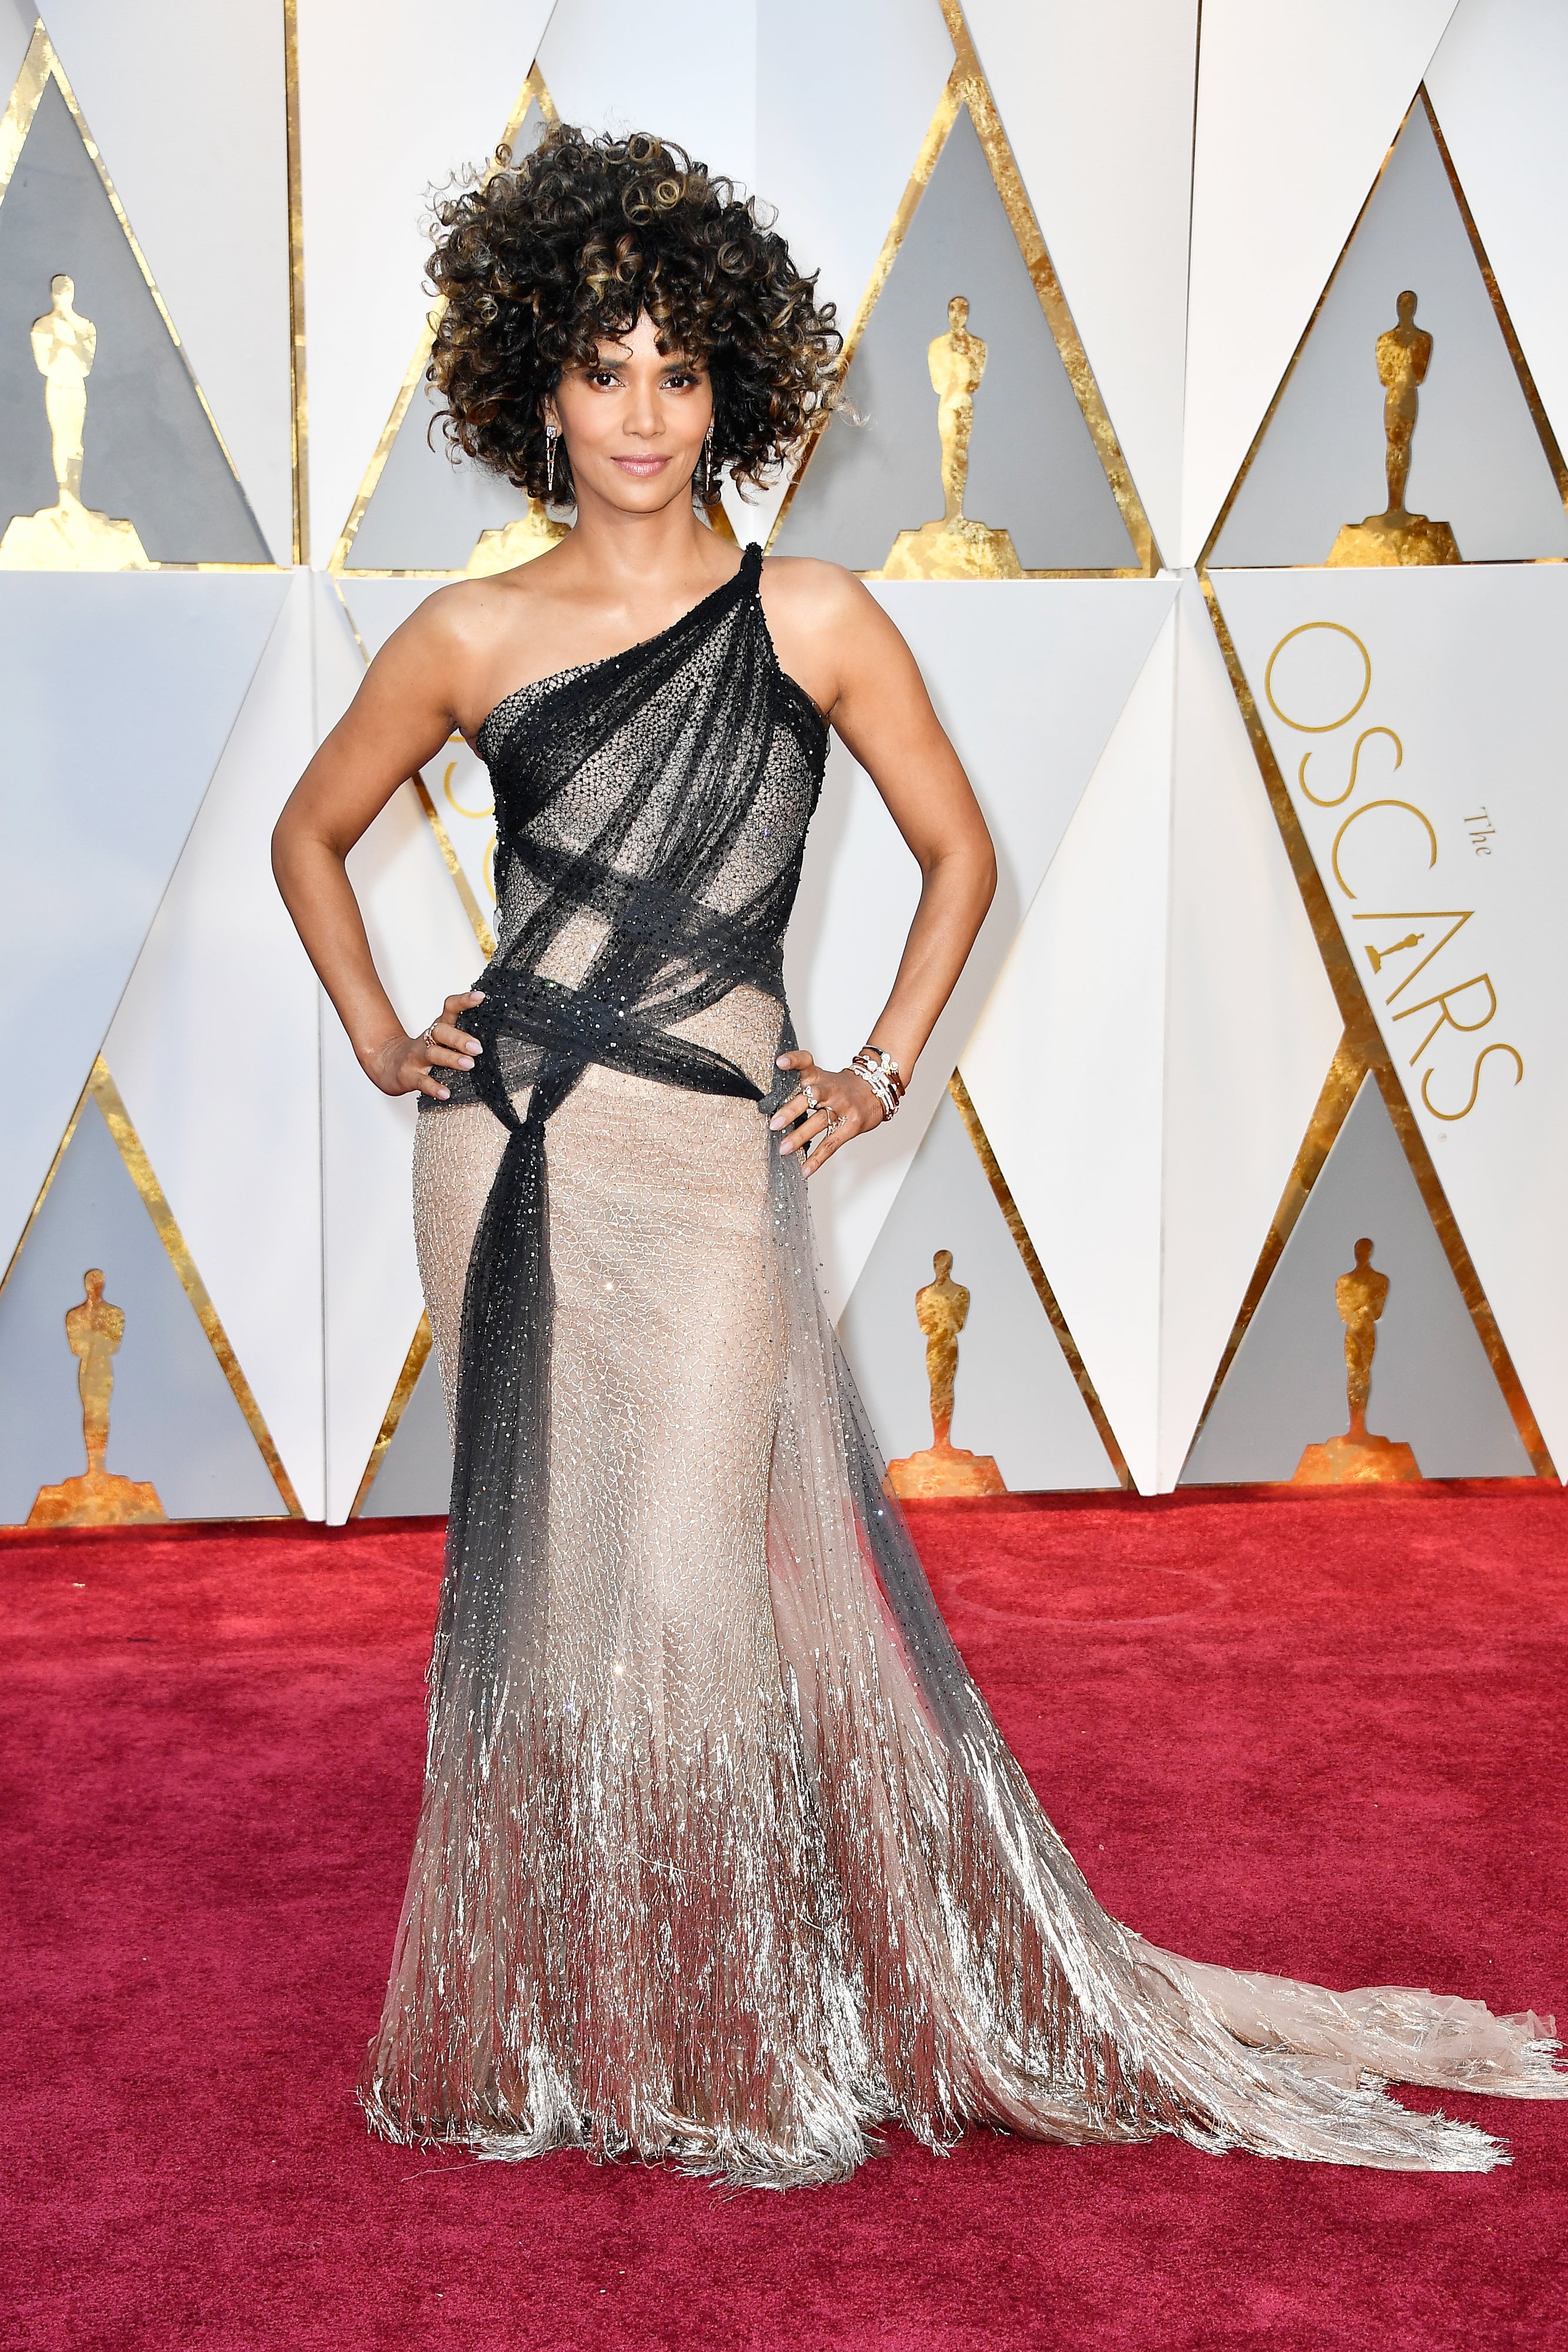 Halle Berry Defends Her Oscar Curls: 'I Celebrate My Natural Hair'
